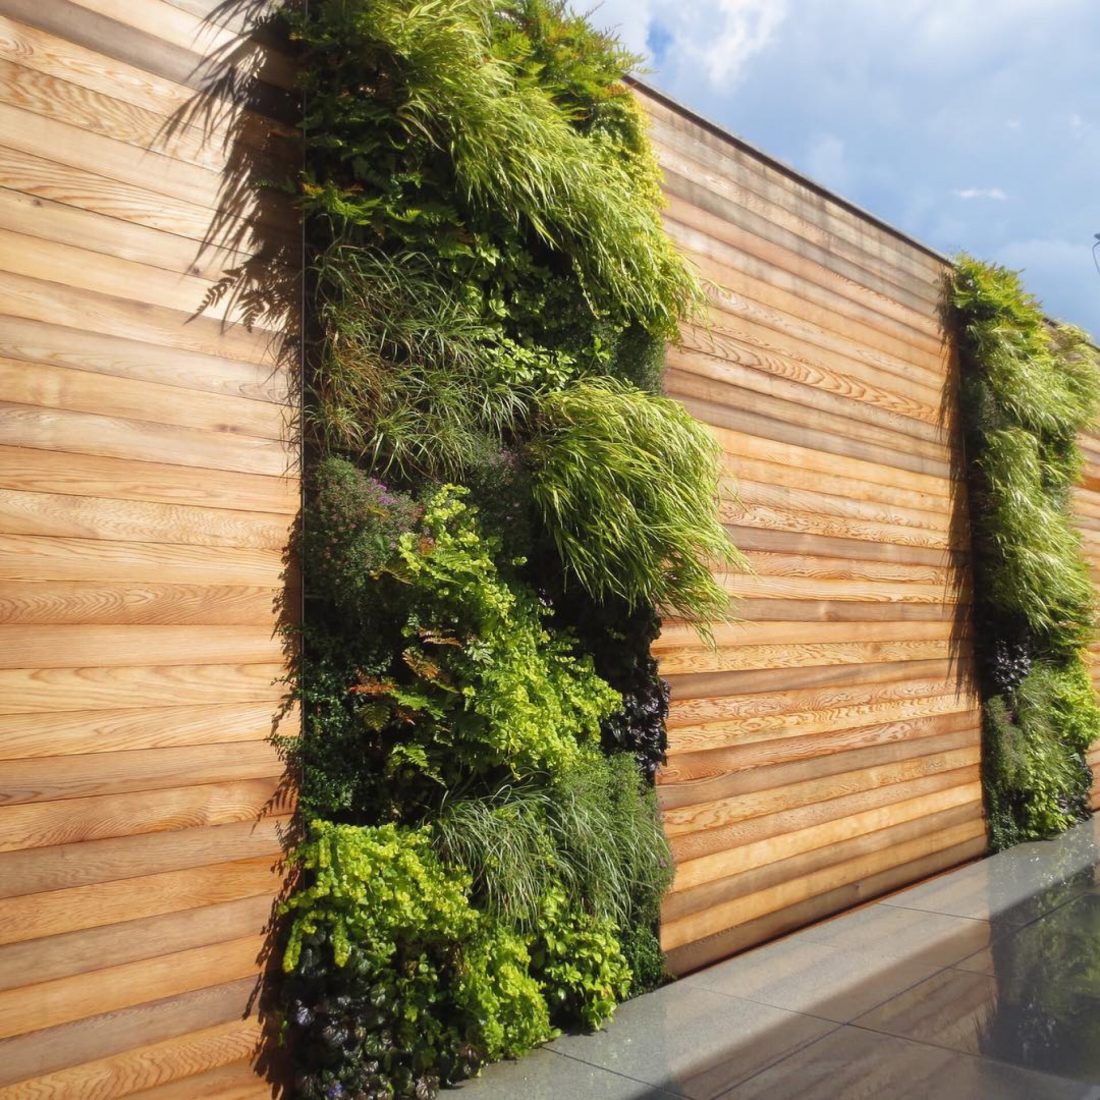 Why I landscape - a happy career story. Vertical planted wall by Town and Gardens NYC.